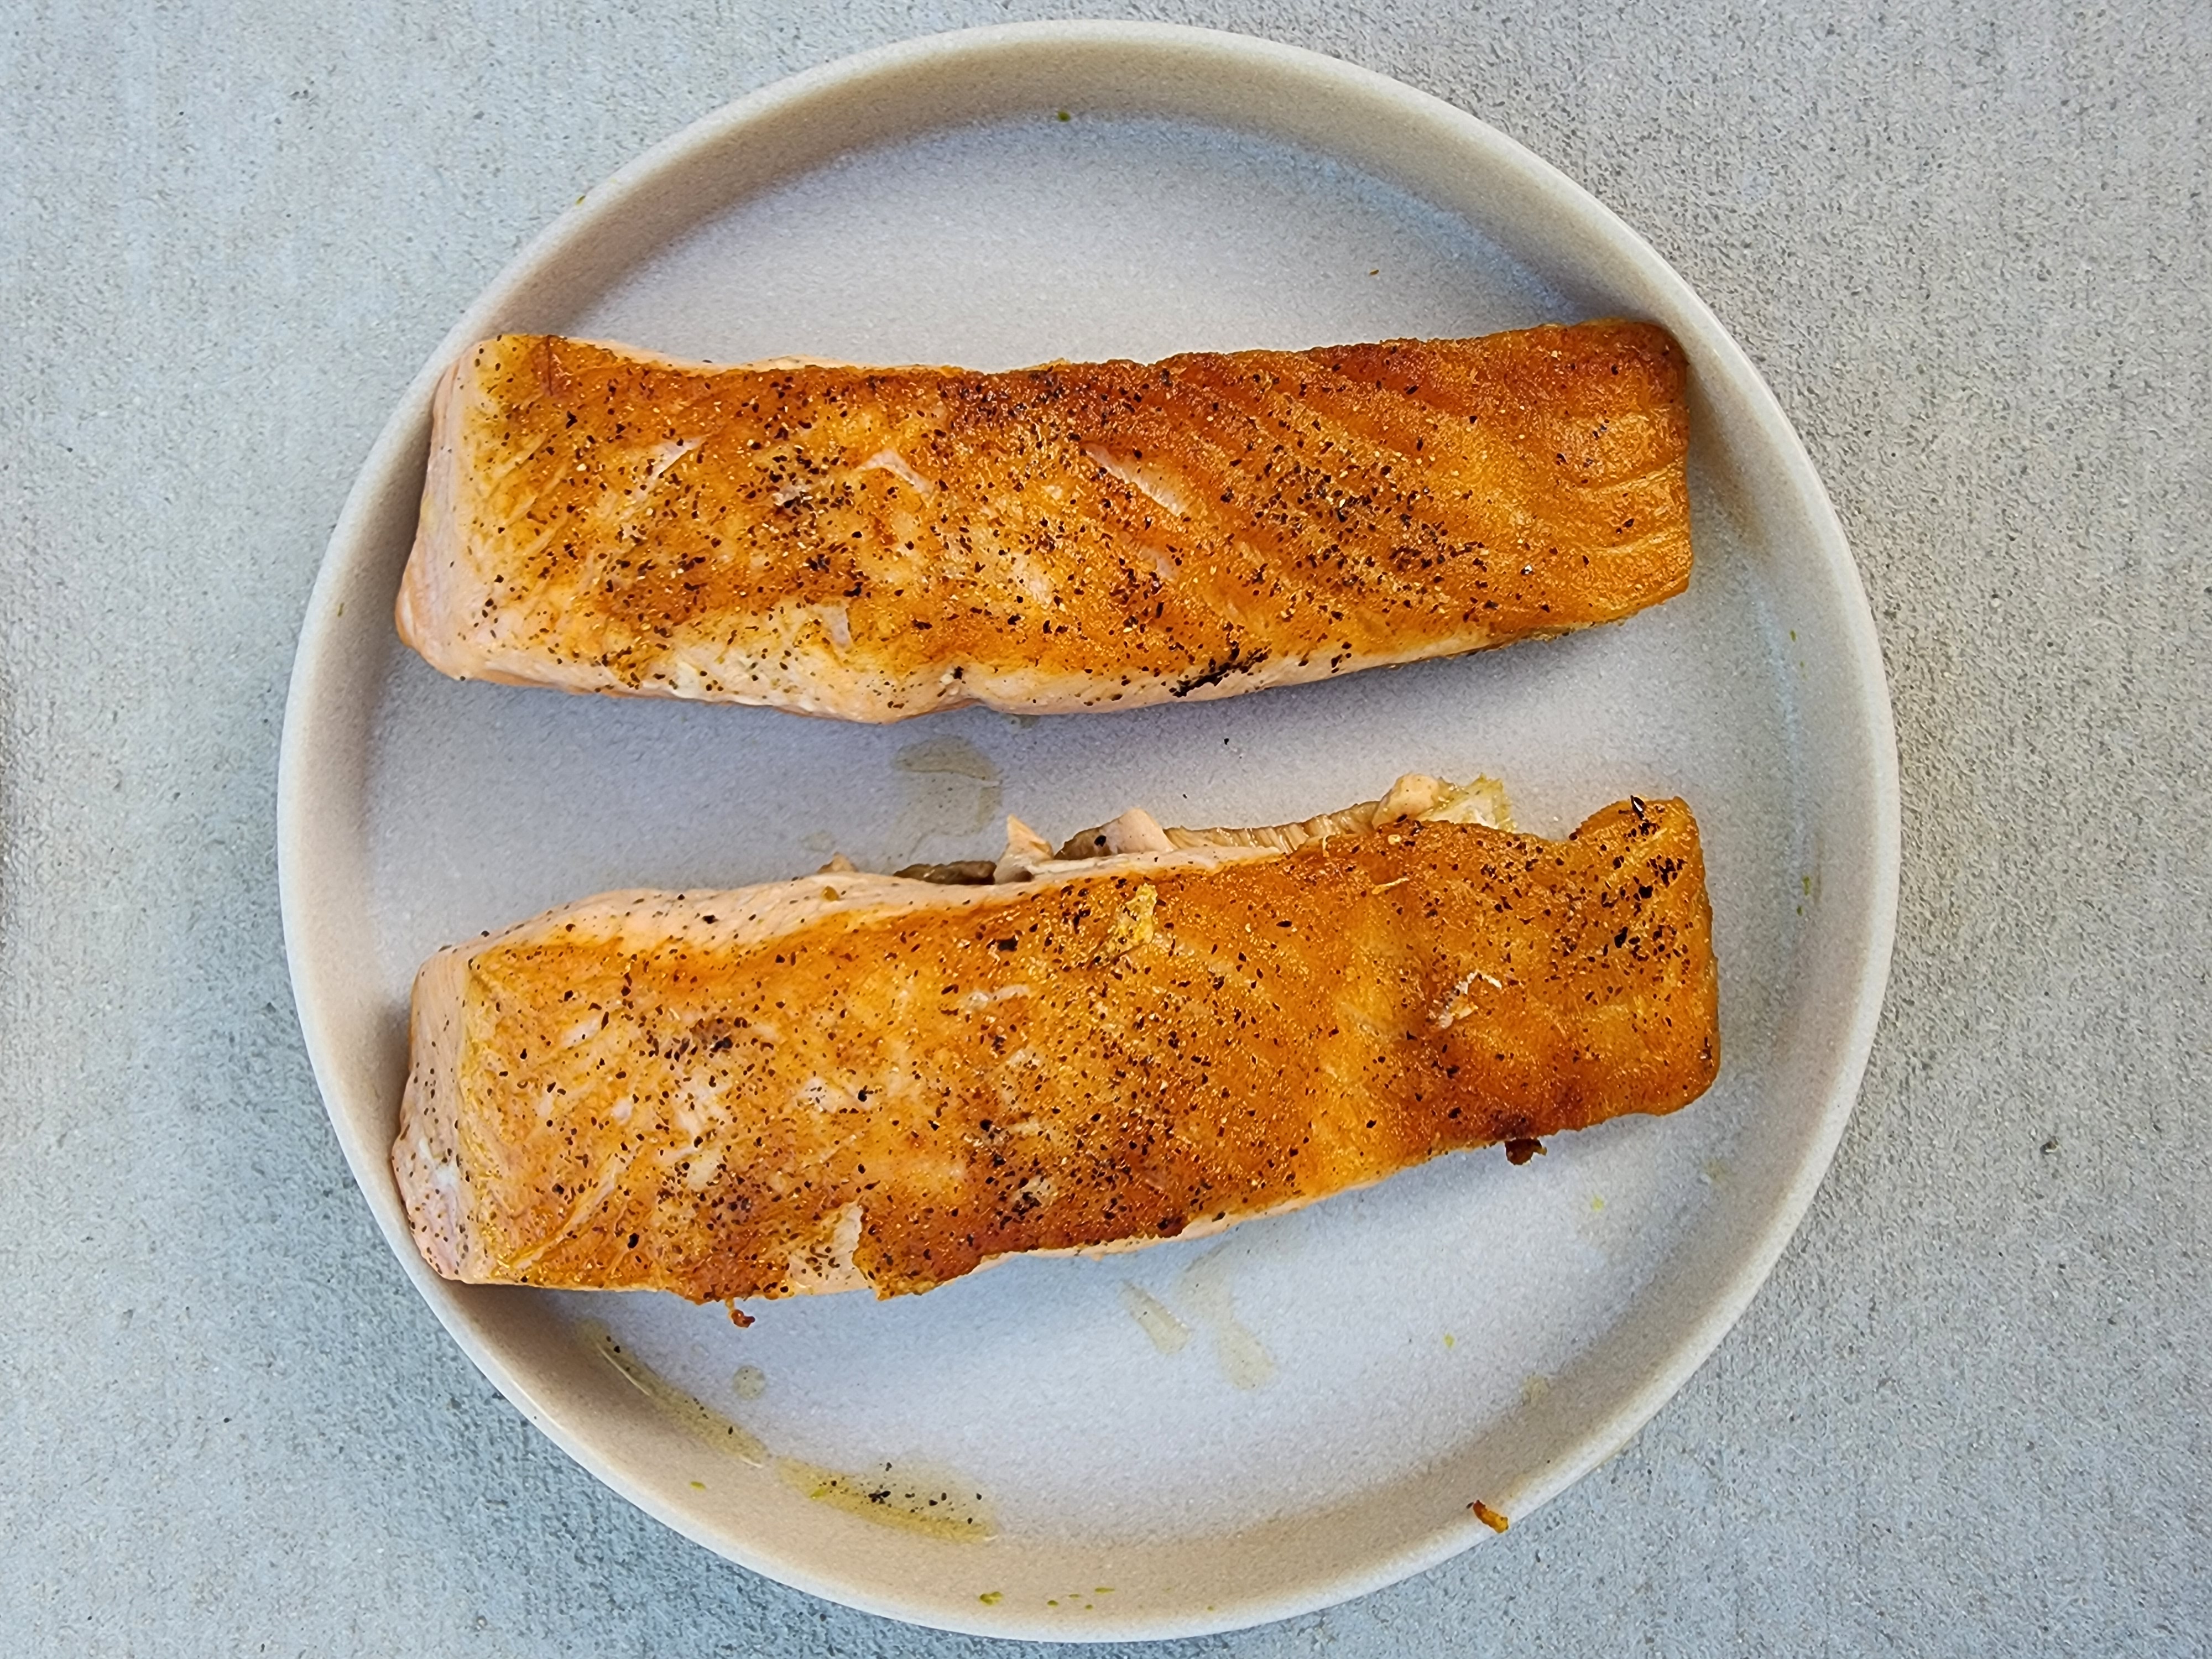 Finished salmon after pan-seared